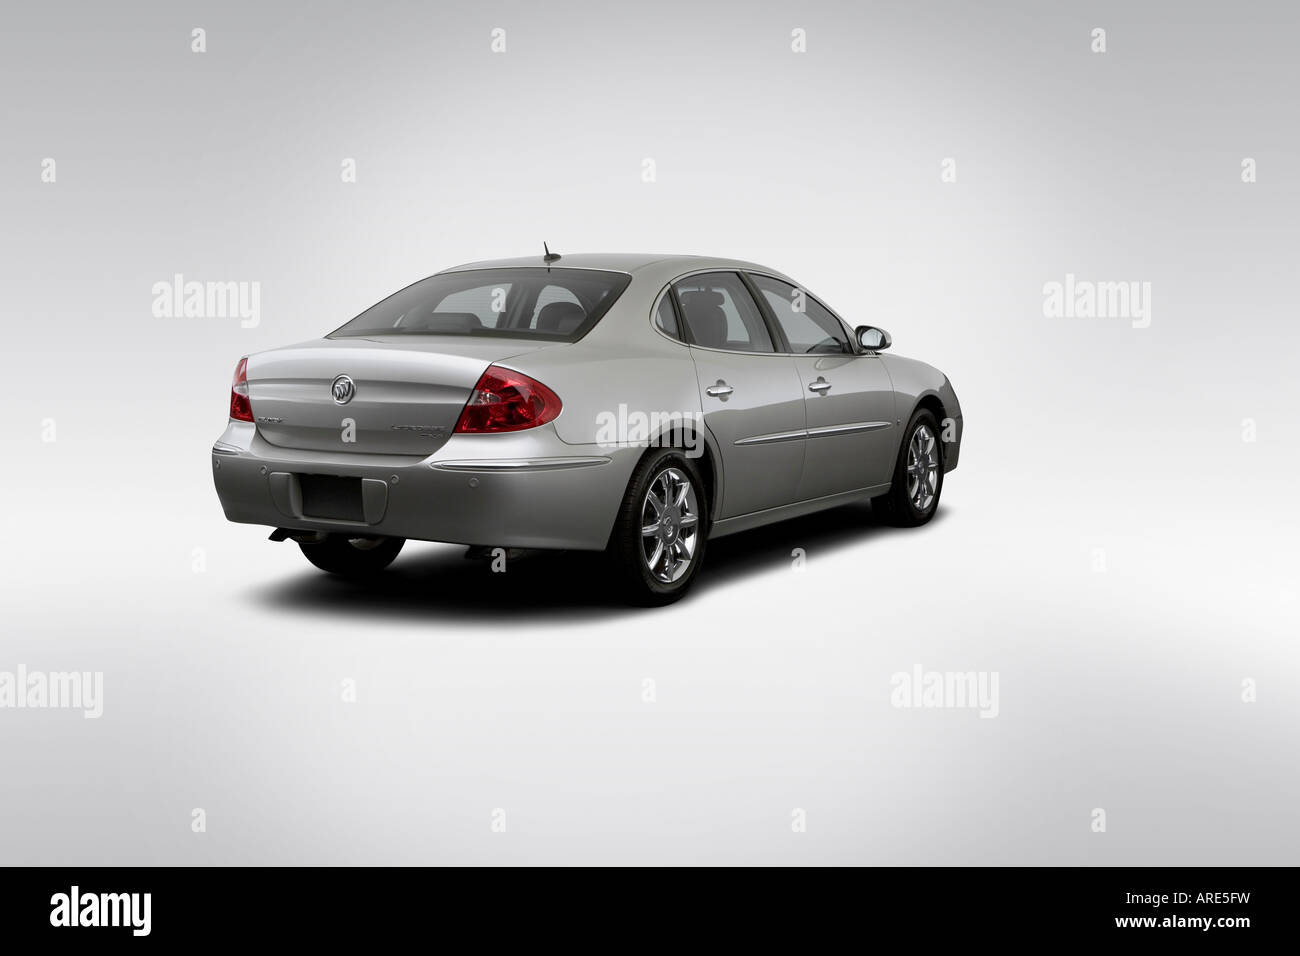 2006 Buick Lacrosse CXS in Gray - Rear angle view Stock Photo - Alamy